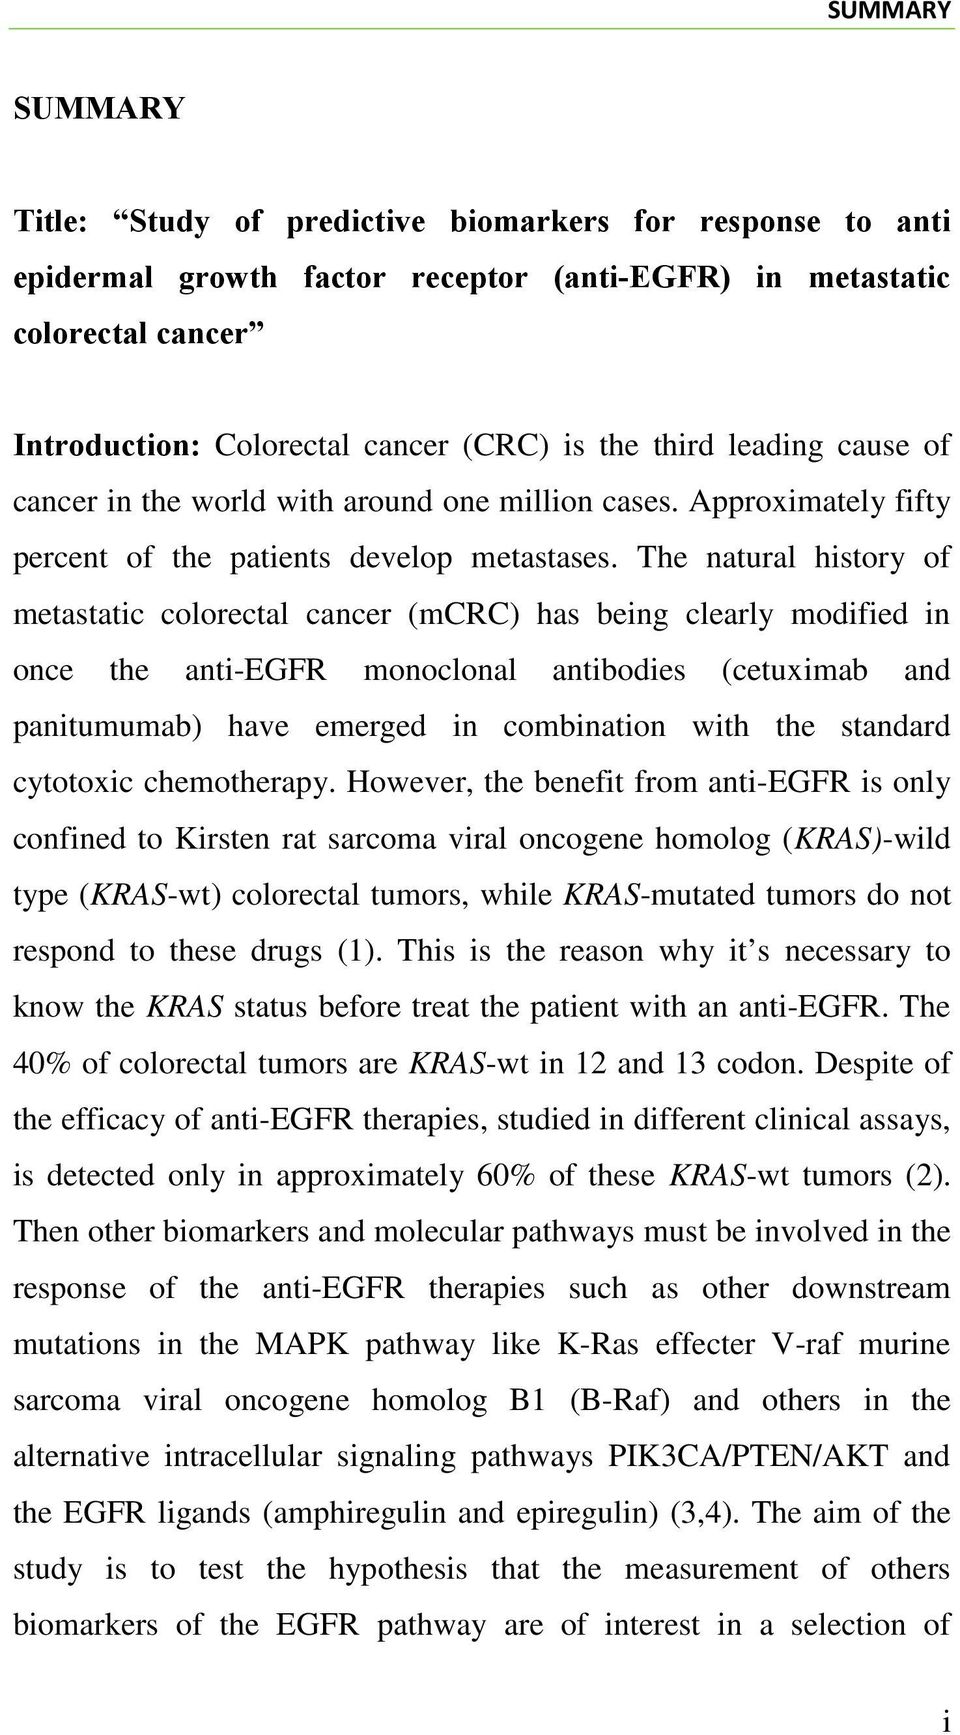 The natural history of metastatic colorectal cancer (mcrc) has being clearly modified in once the anti-egfr monoclonal antibodies (cetuximab and panitumumab) have emerged in combination with the